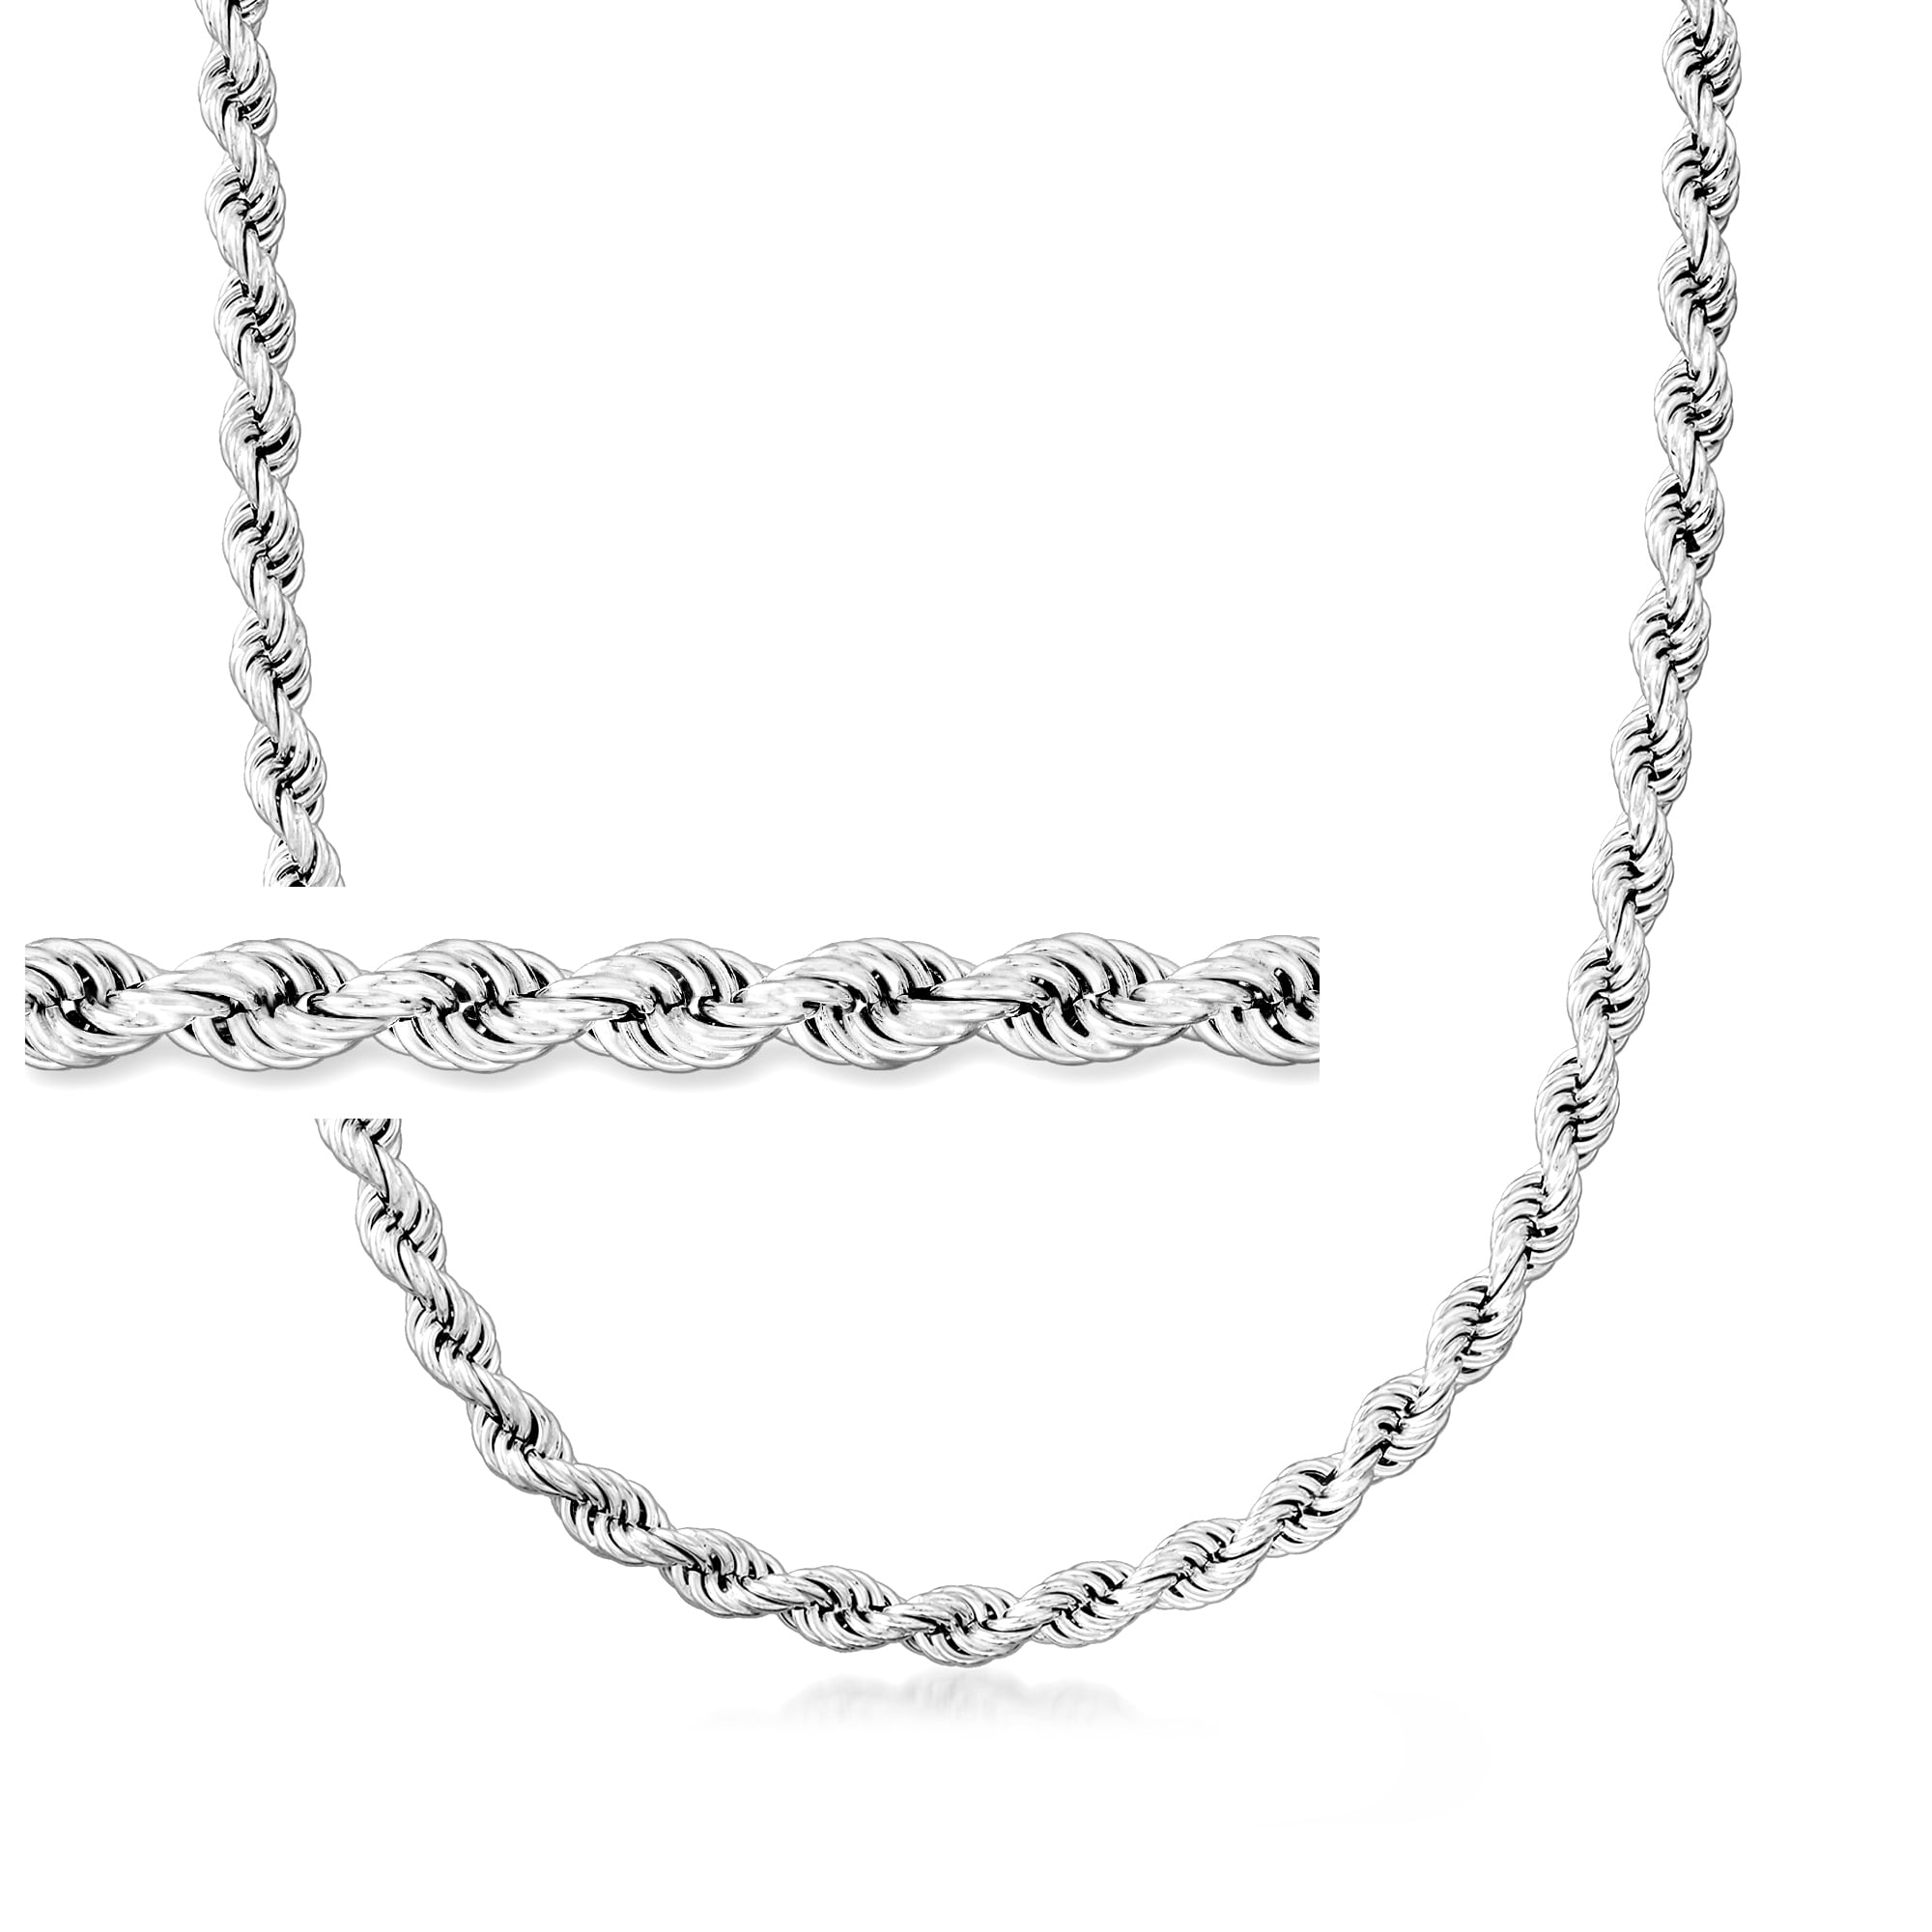 Ross Curb Chain for Men - Silver